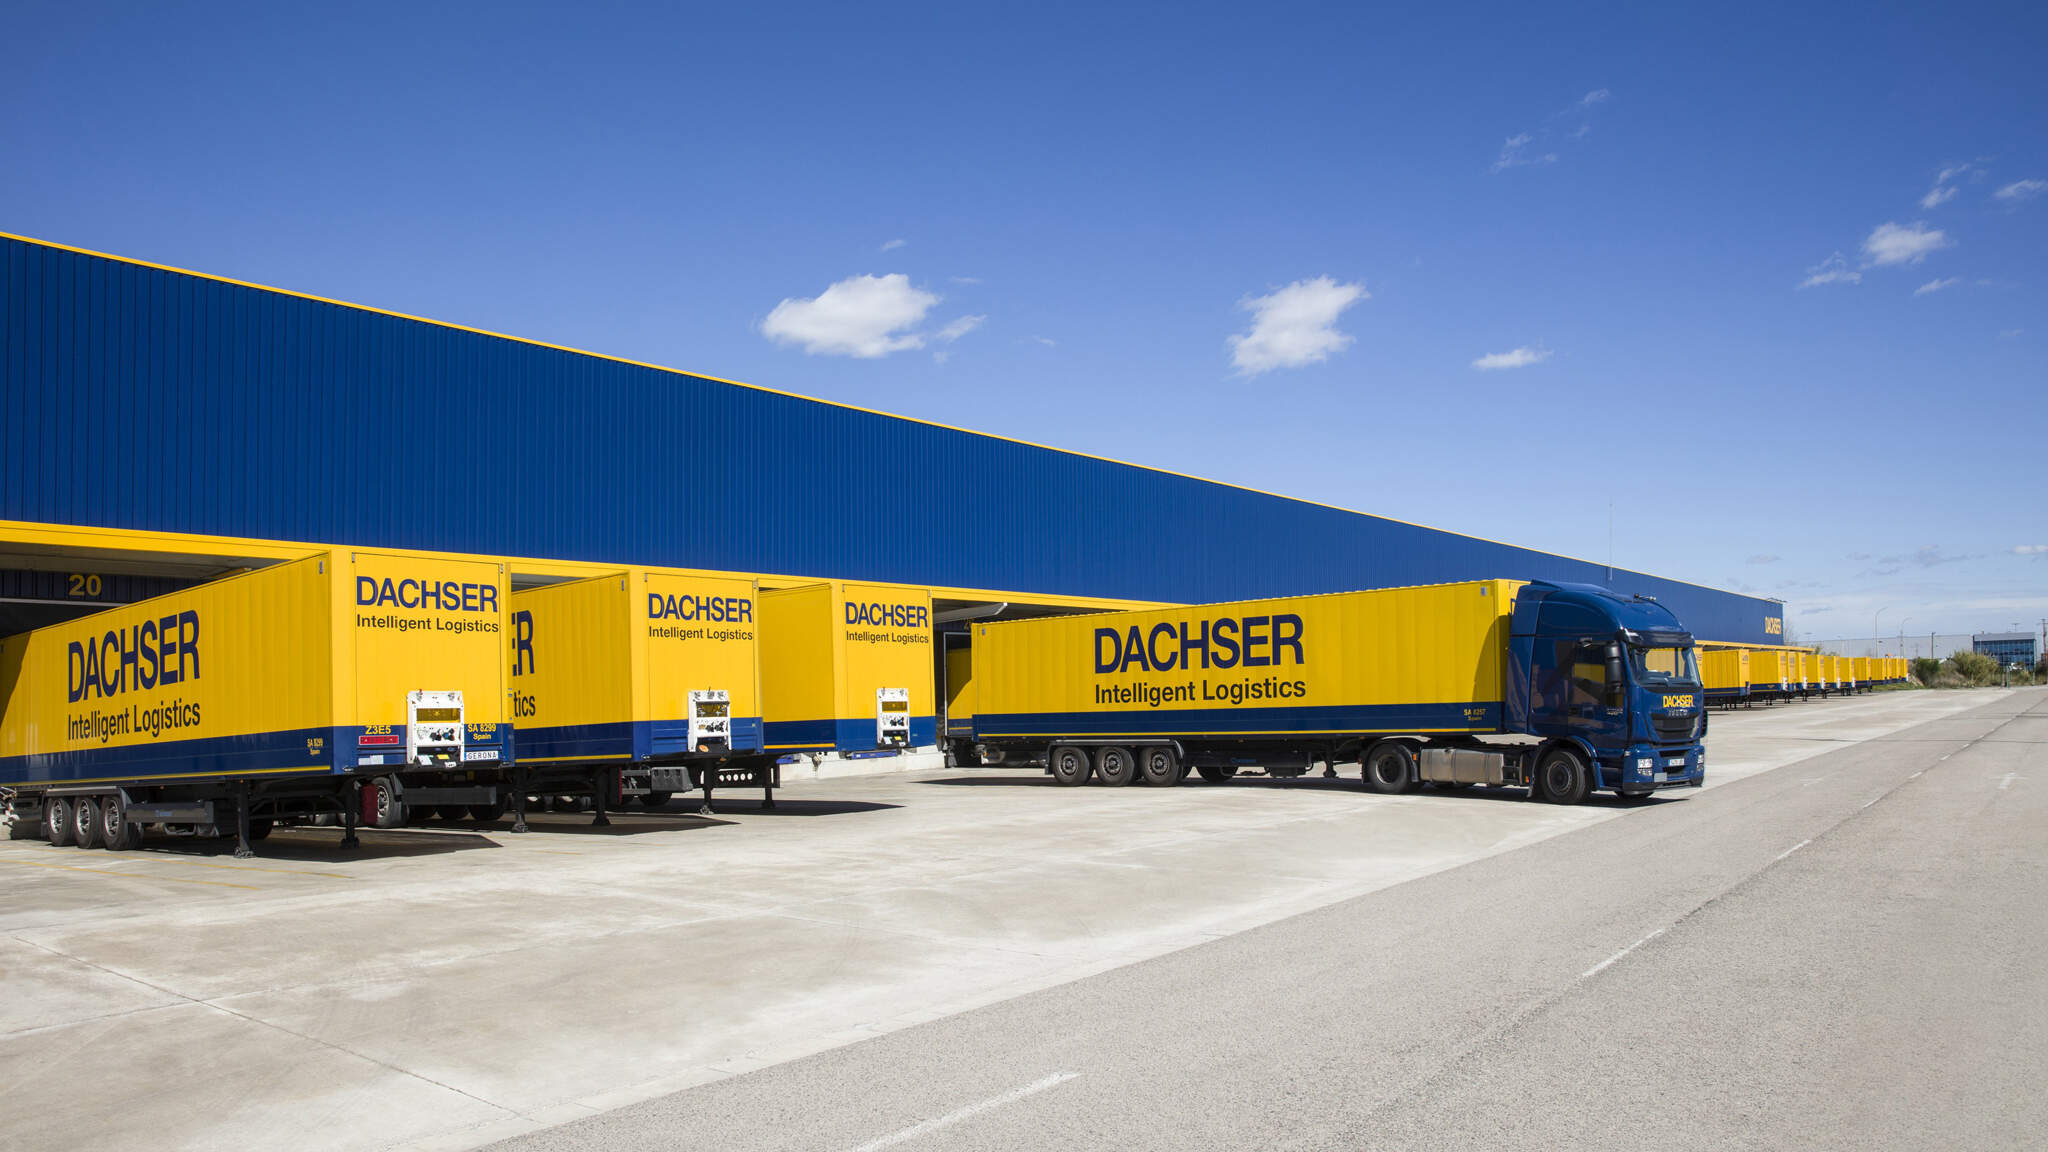 DACHSER at the forefront of the logistics industry